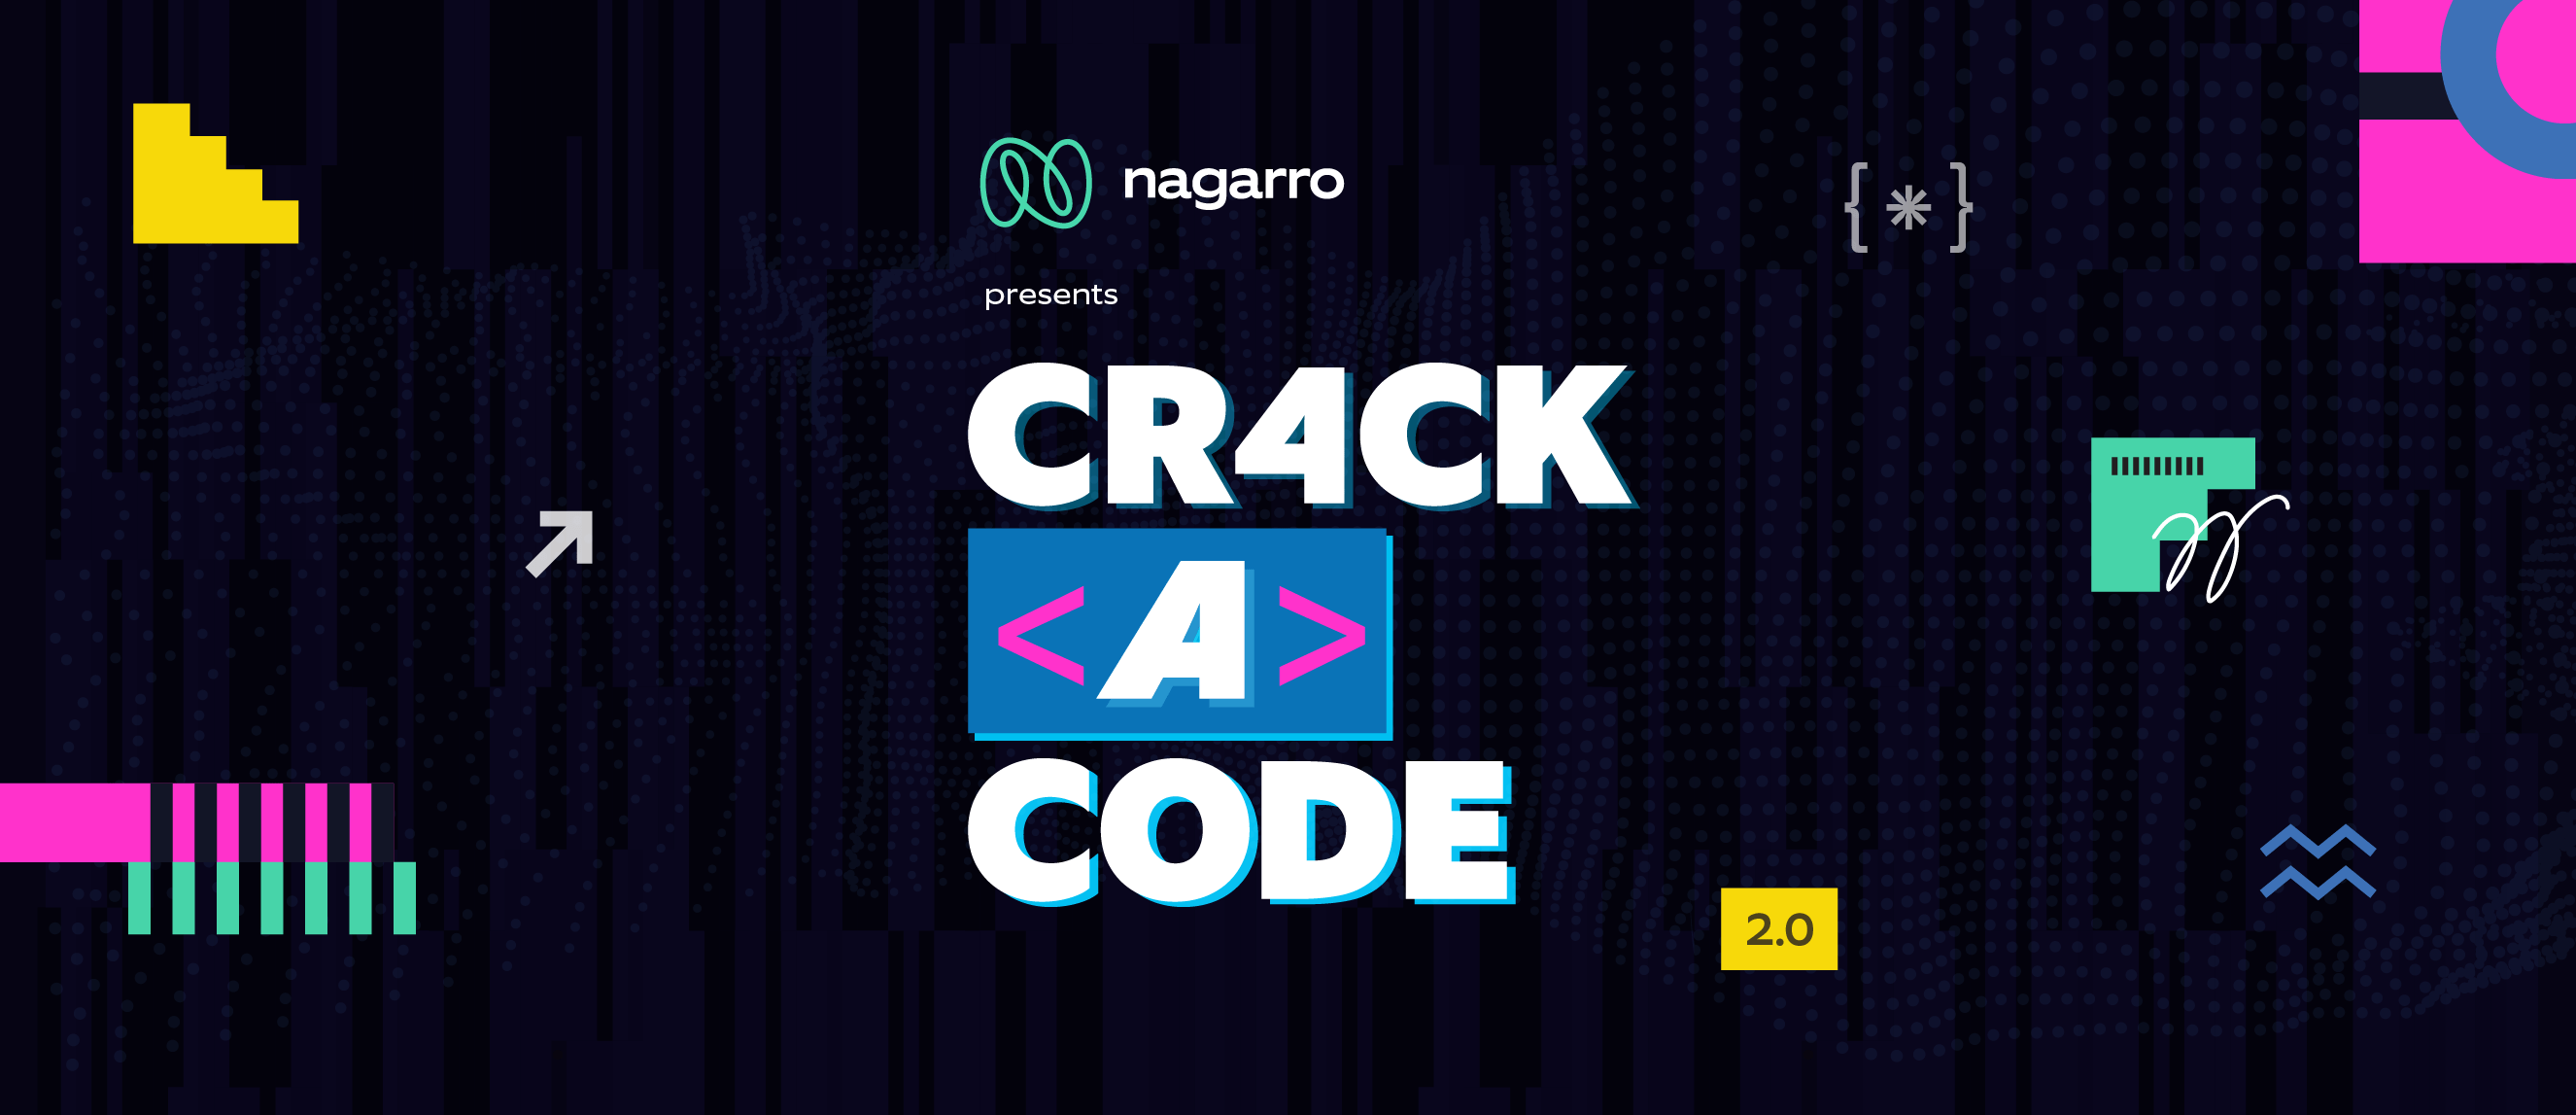 CRACK A CODE 2.0 promotes talent development in the technology industry